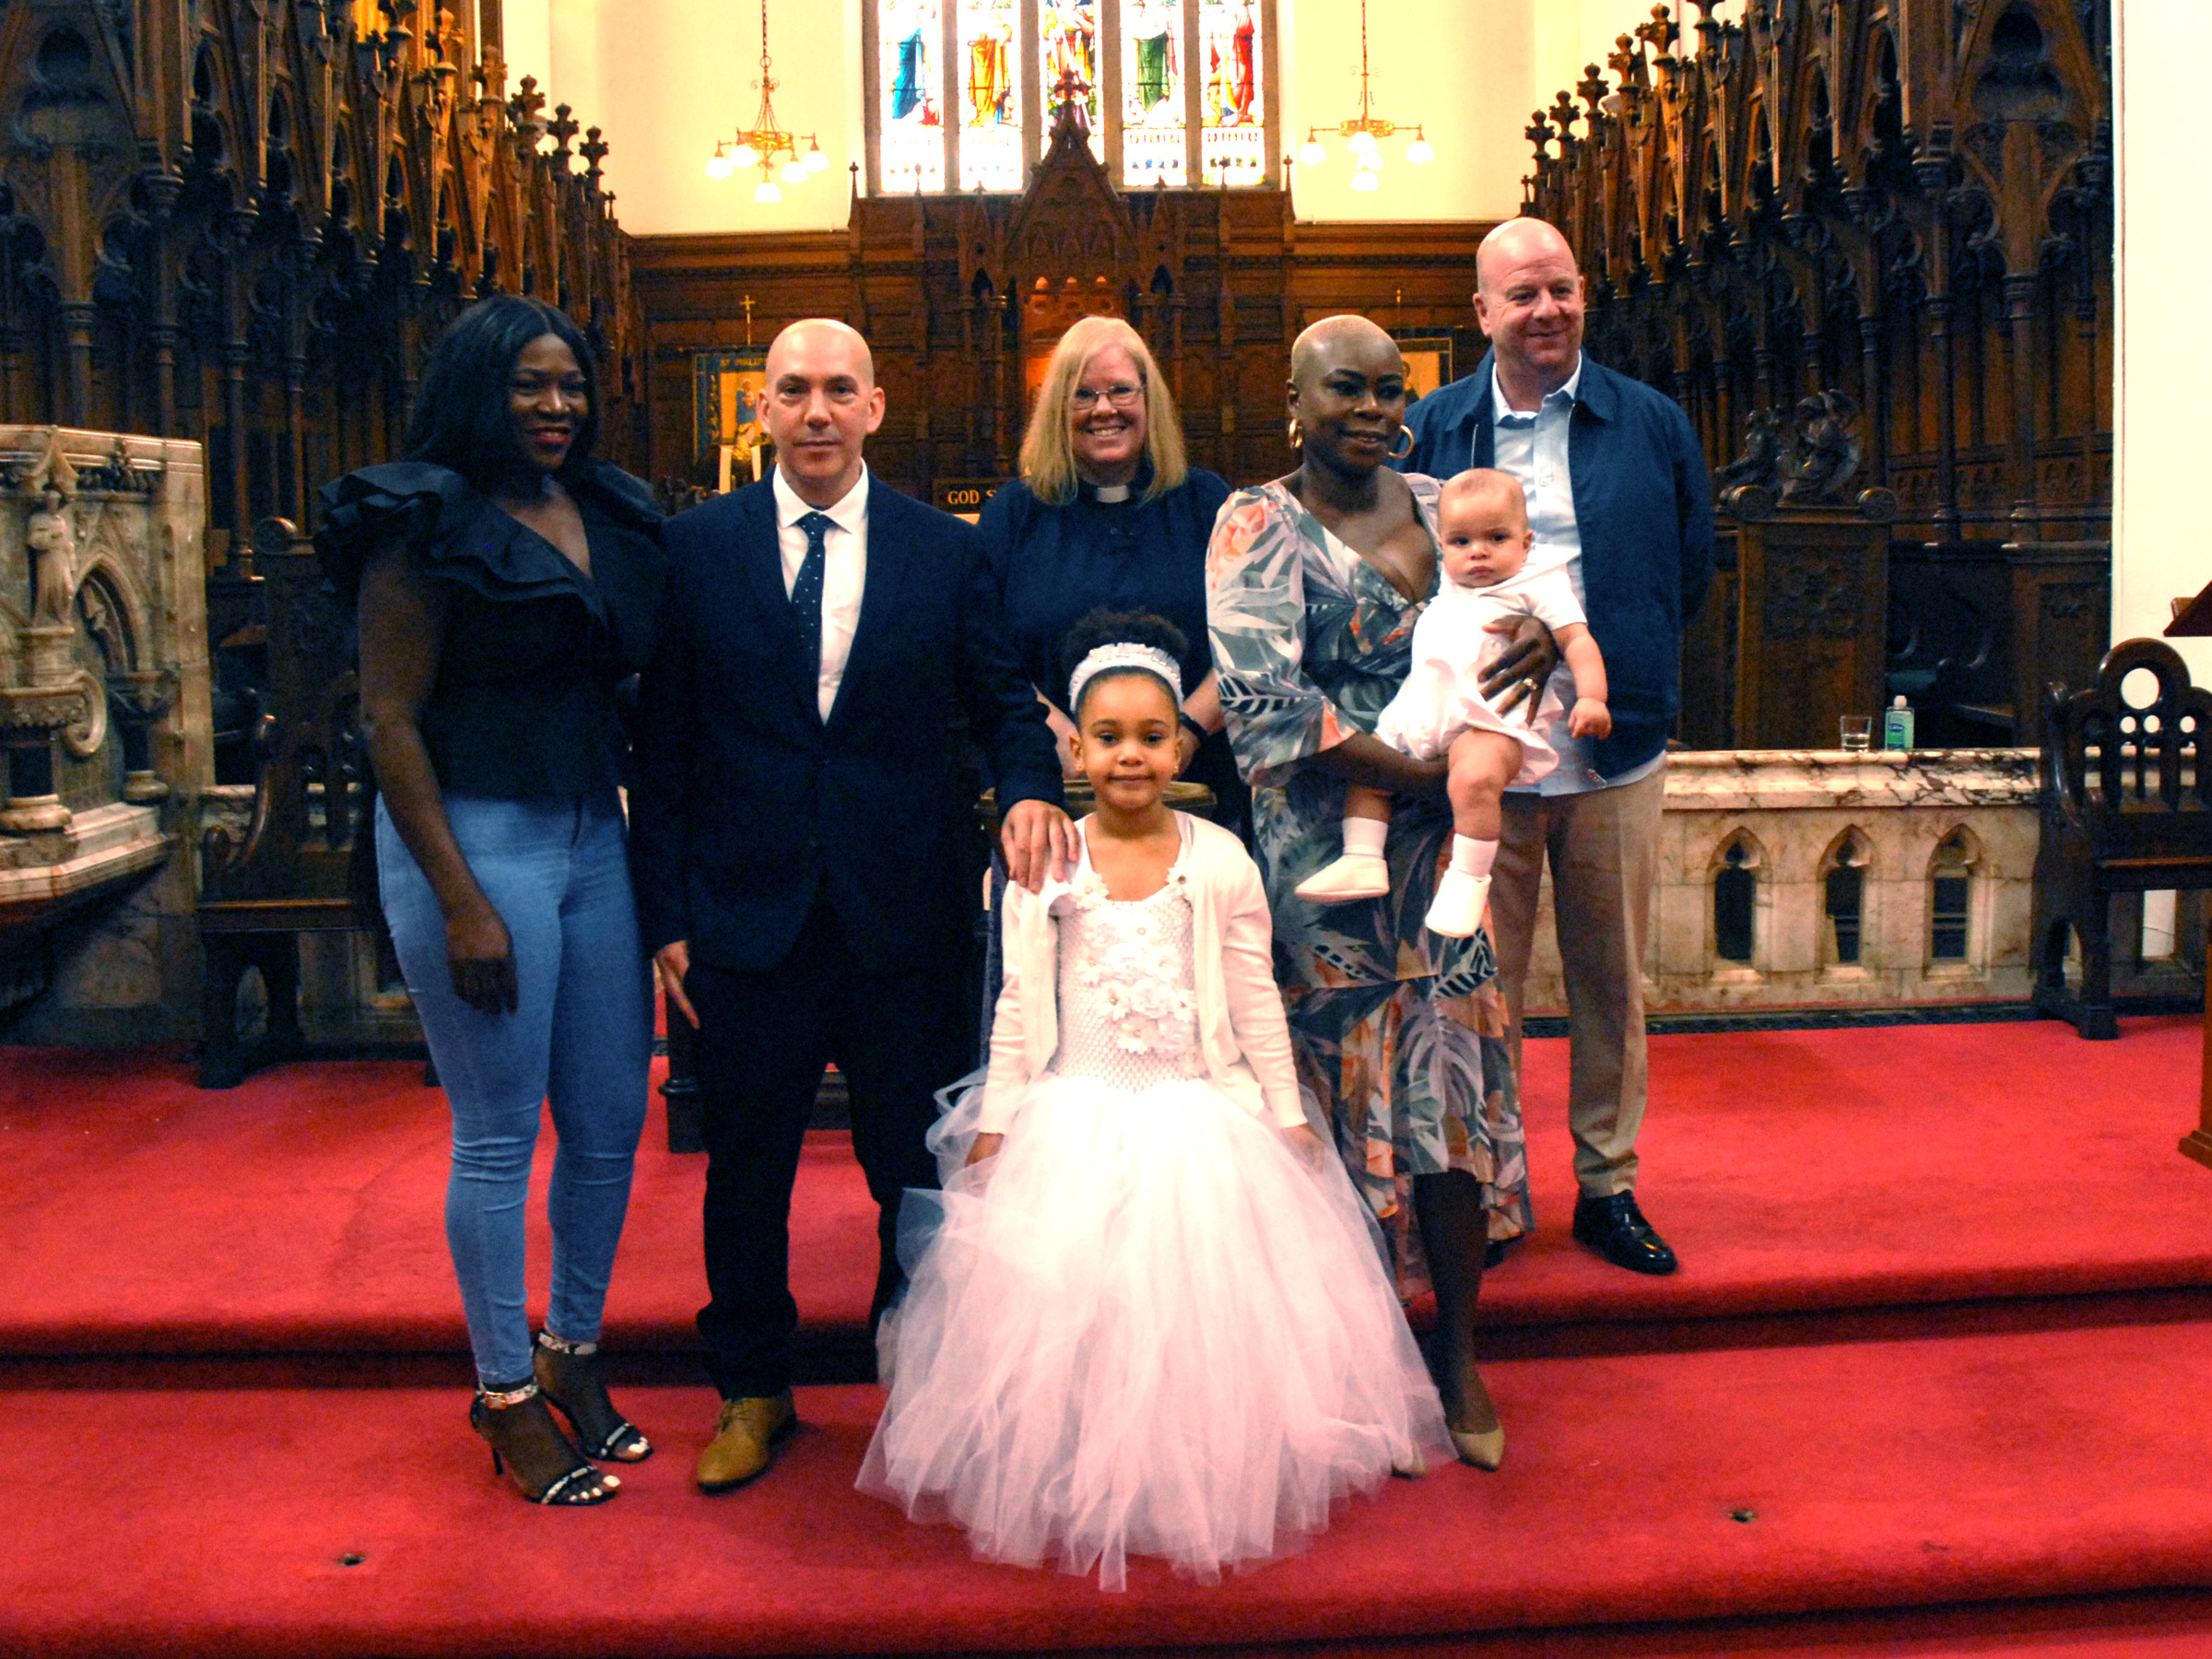 Christenings at PPW Church